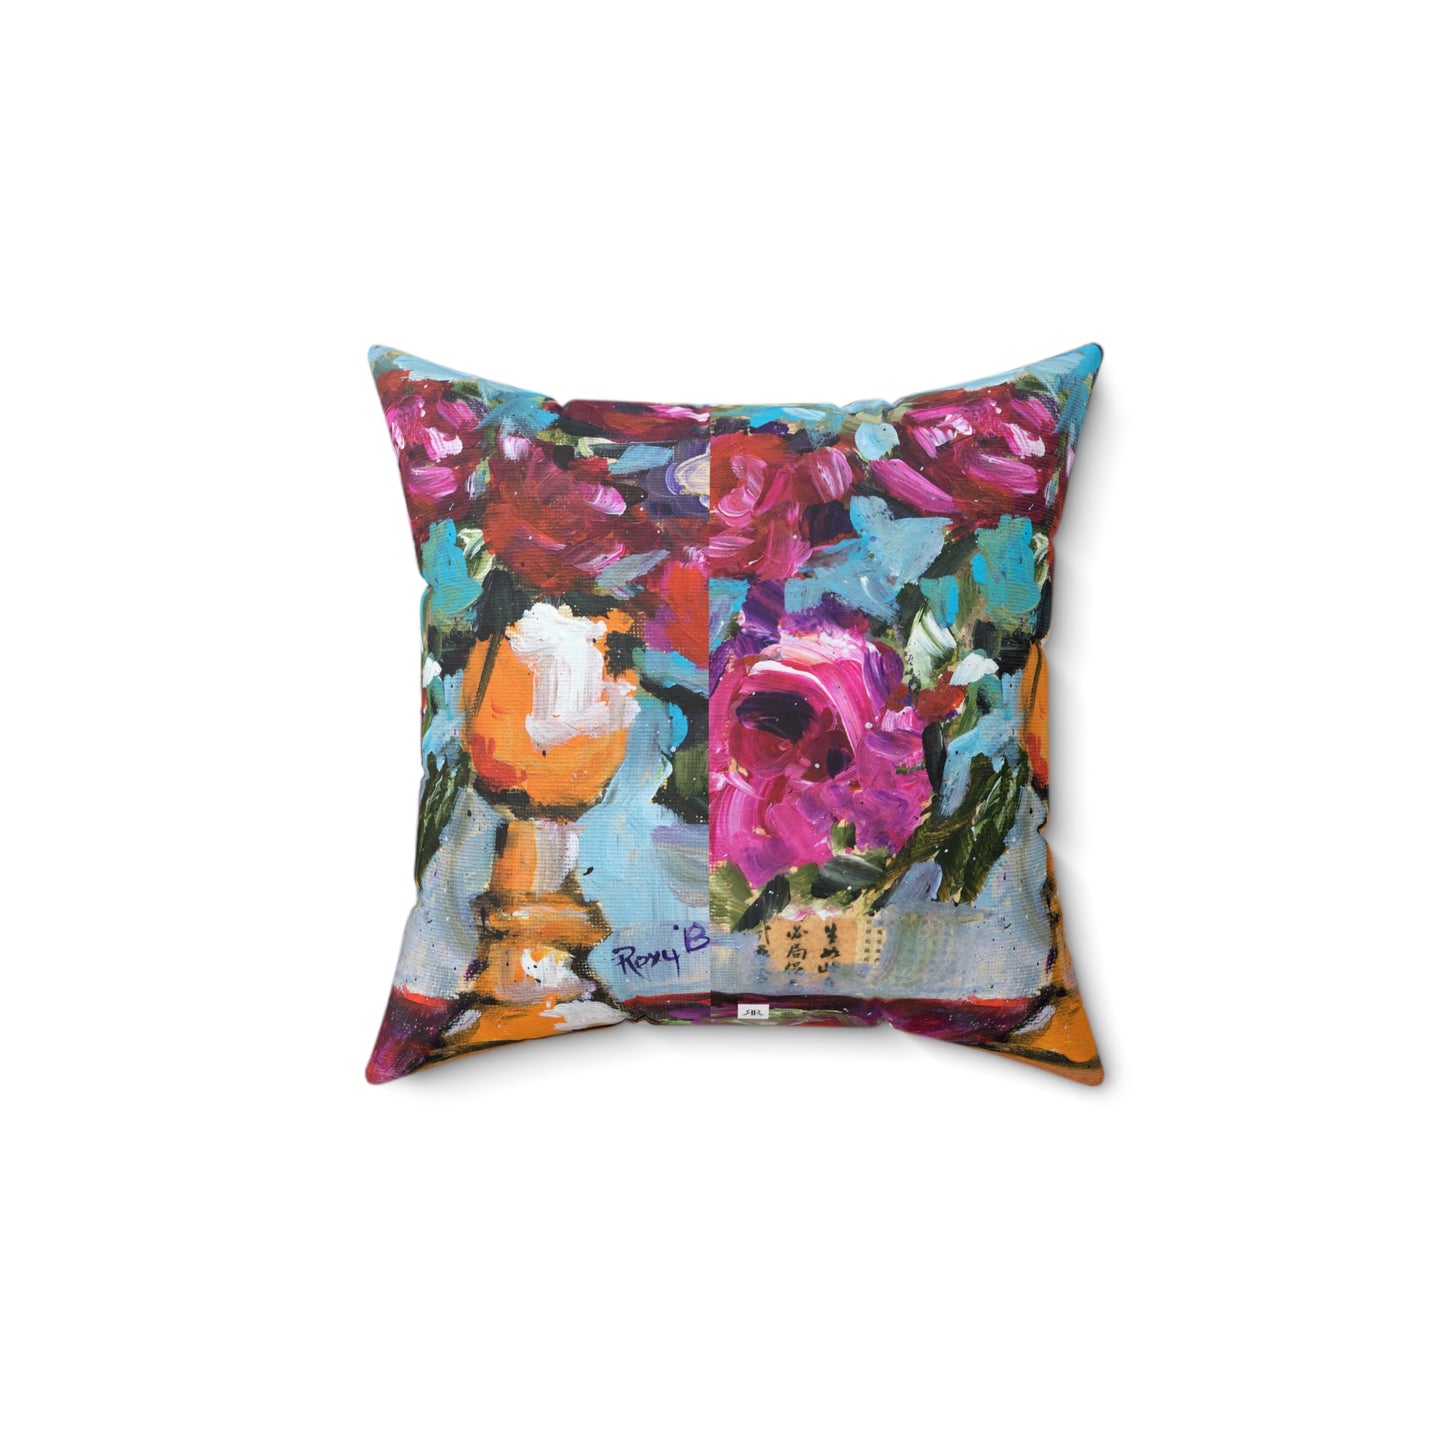 Pink Roses in an Orange Goblet Indoor Spun Polyester Square Pillow